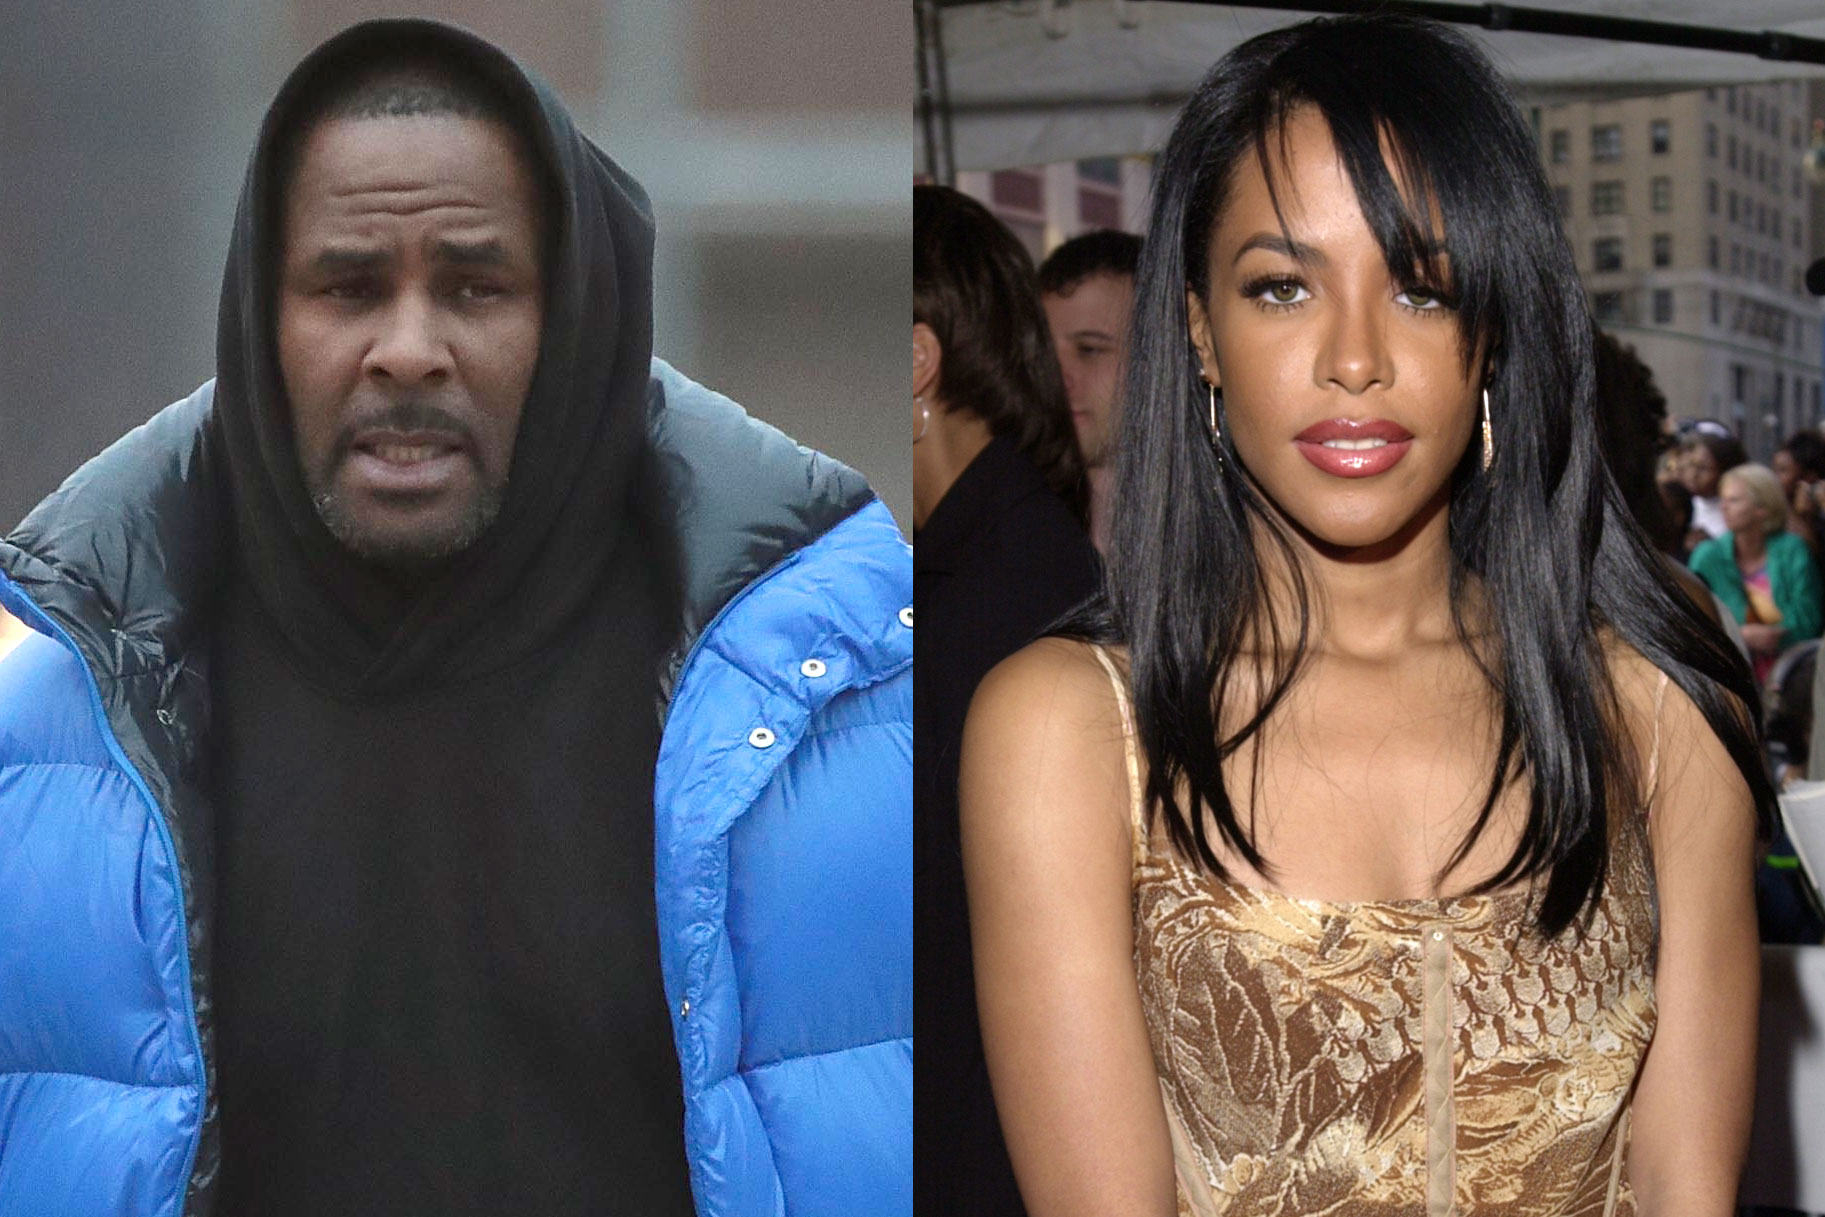 The Piss Just Keeps On Pouring R Kelly Allegedly Married 15 Year Old Aaliyah To Prevent Her